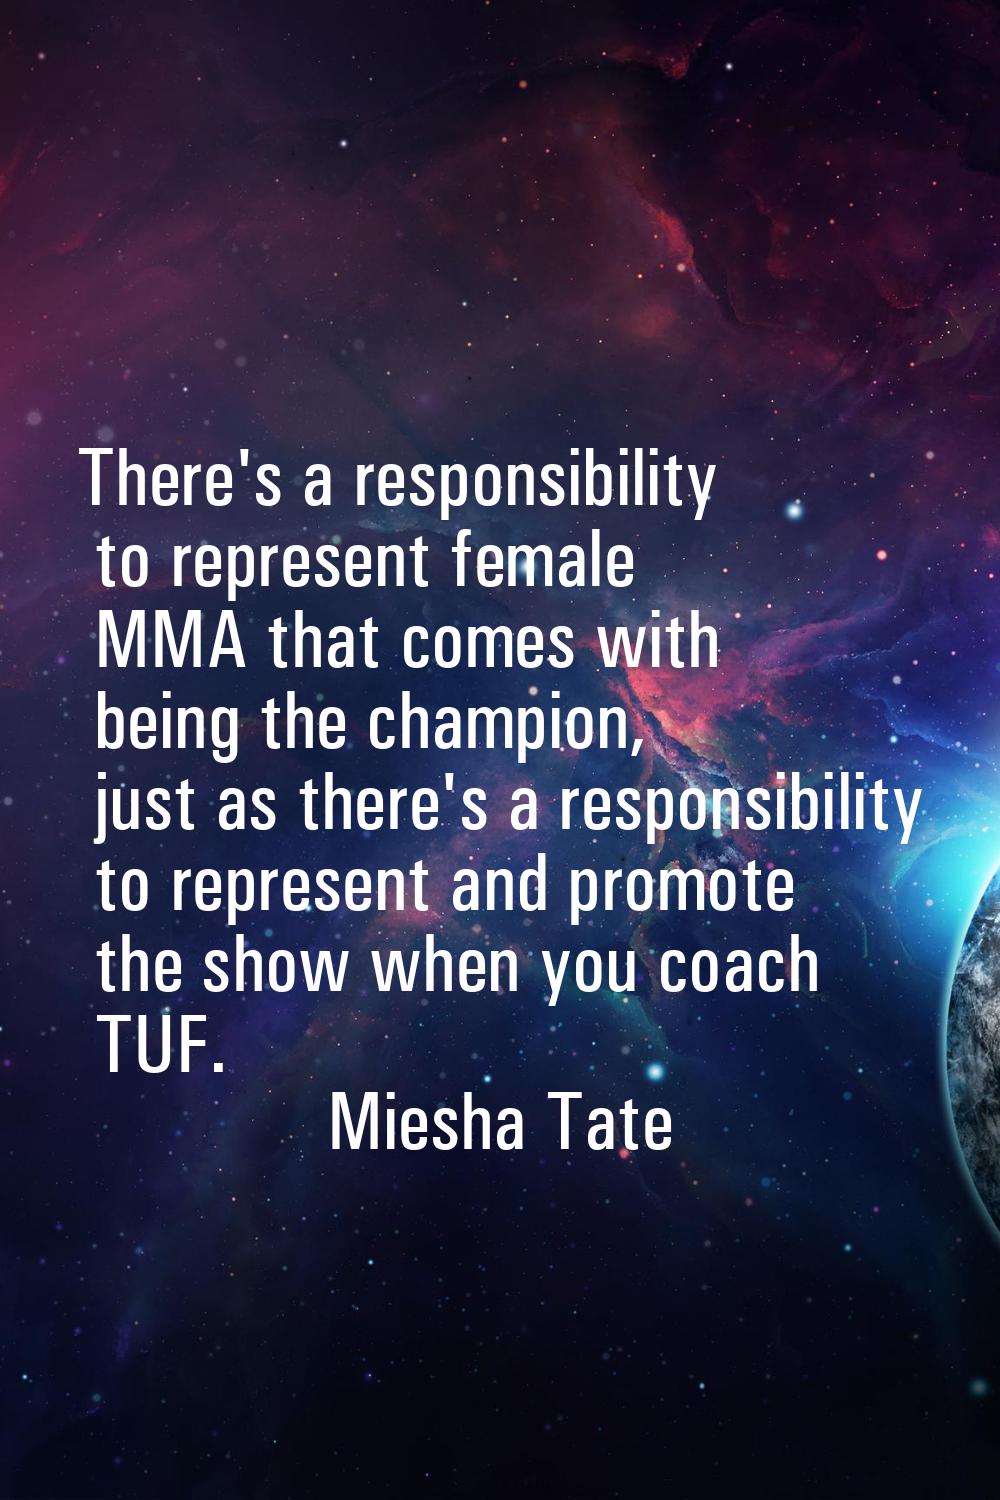 There's a responsibility to represent female MMA that comes with being the champion, just as there'